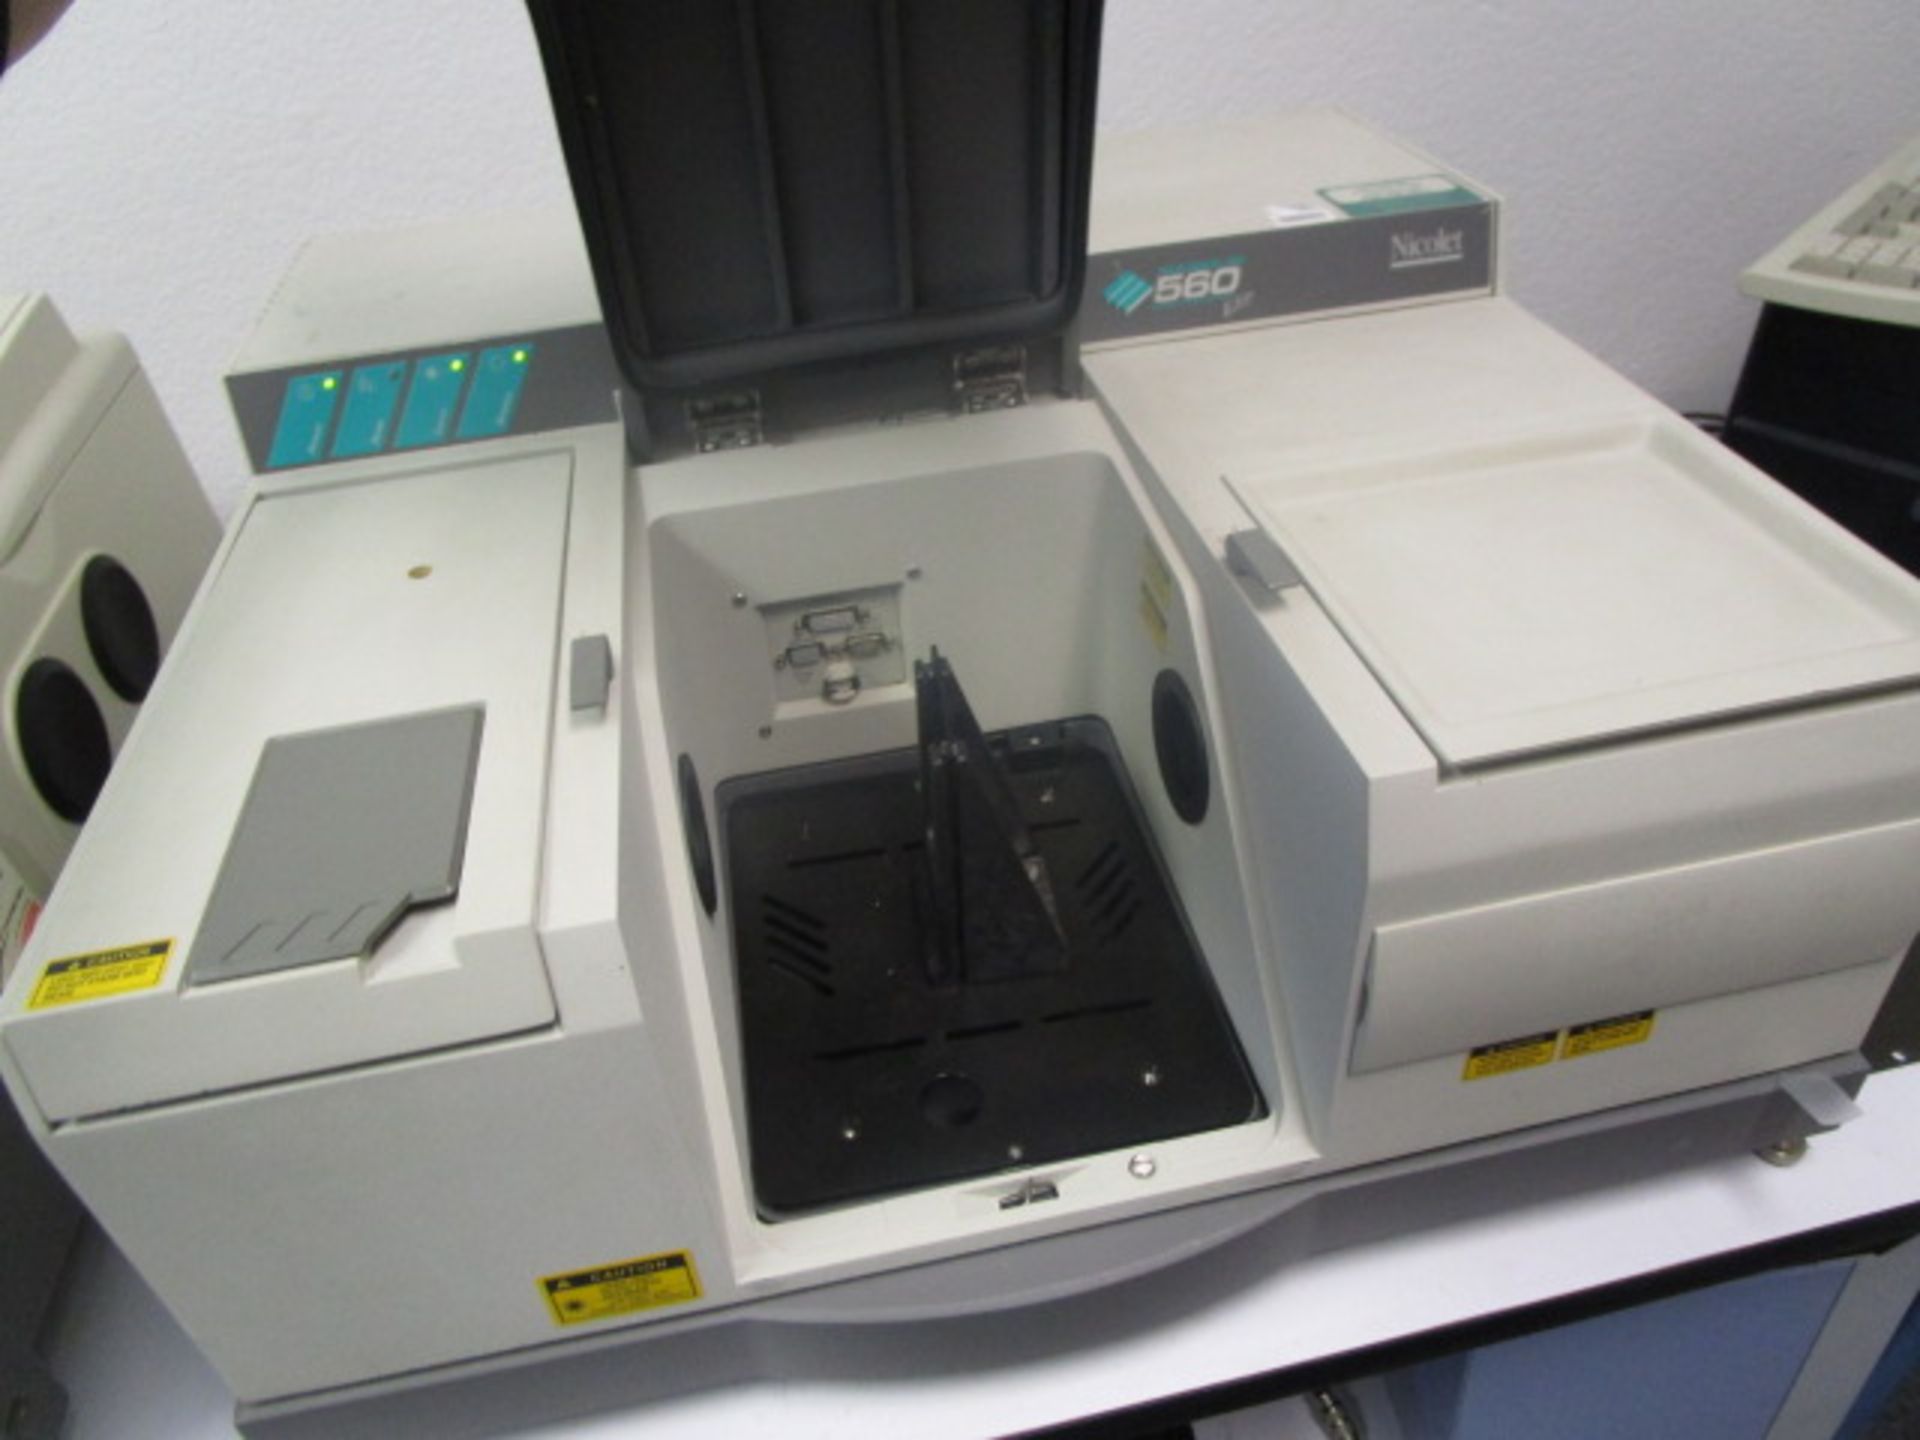 Nicolet Magna- IR 560 Spectromer E.S.P. to include software tutorial, and "32 bit" SW. Near and - Image 19 of 31